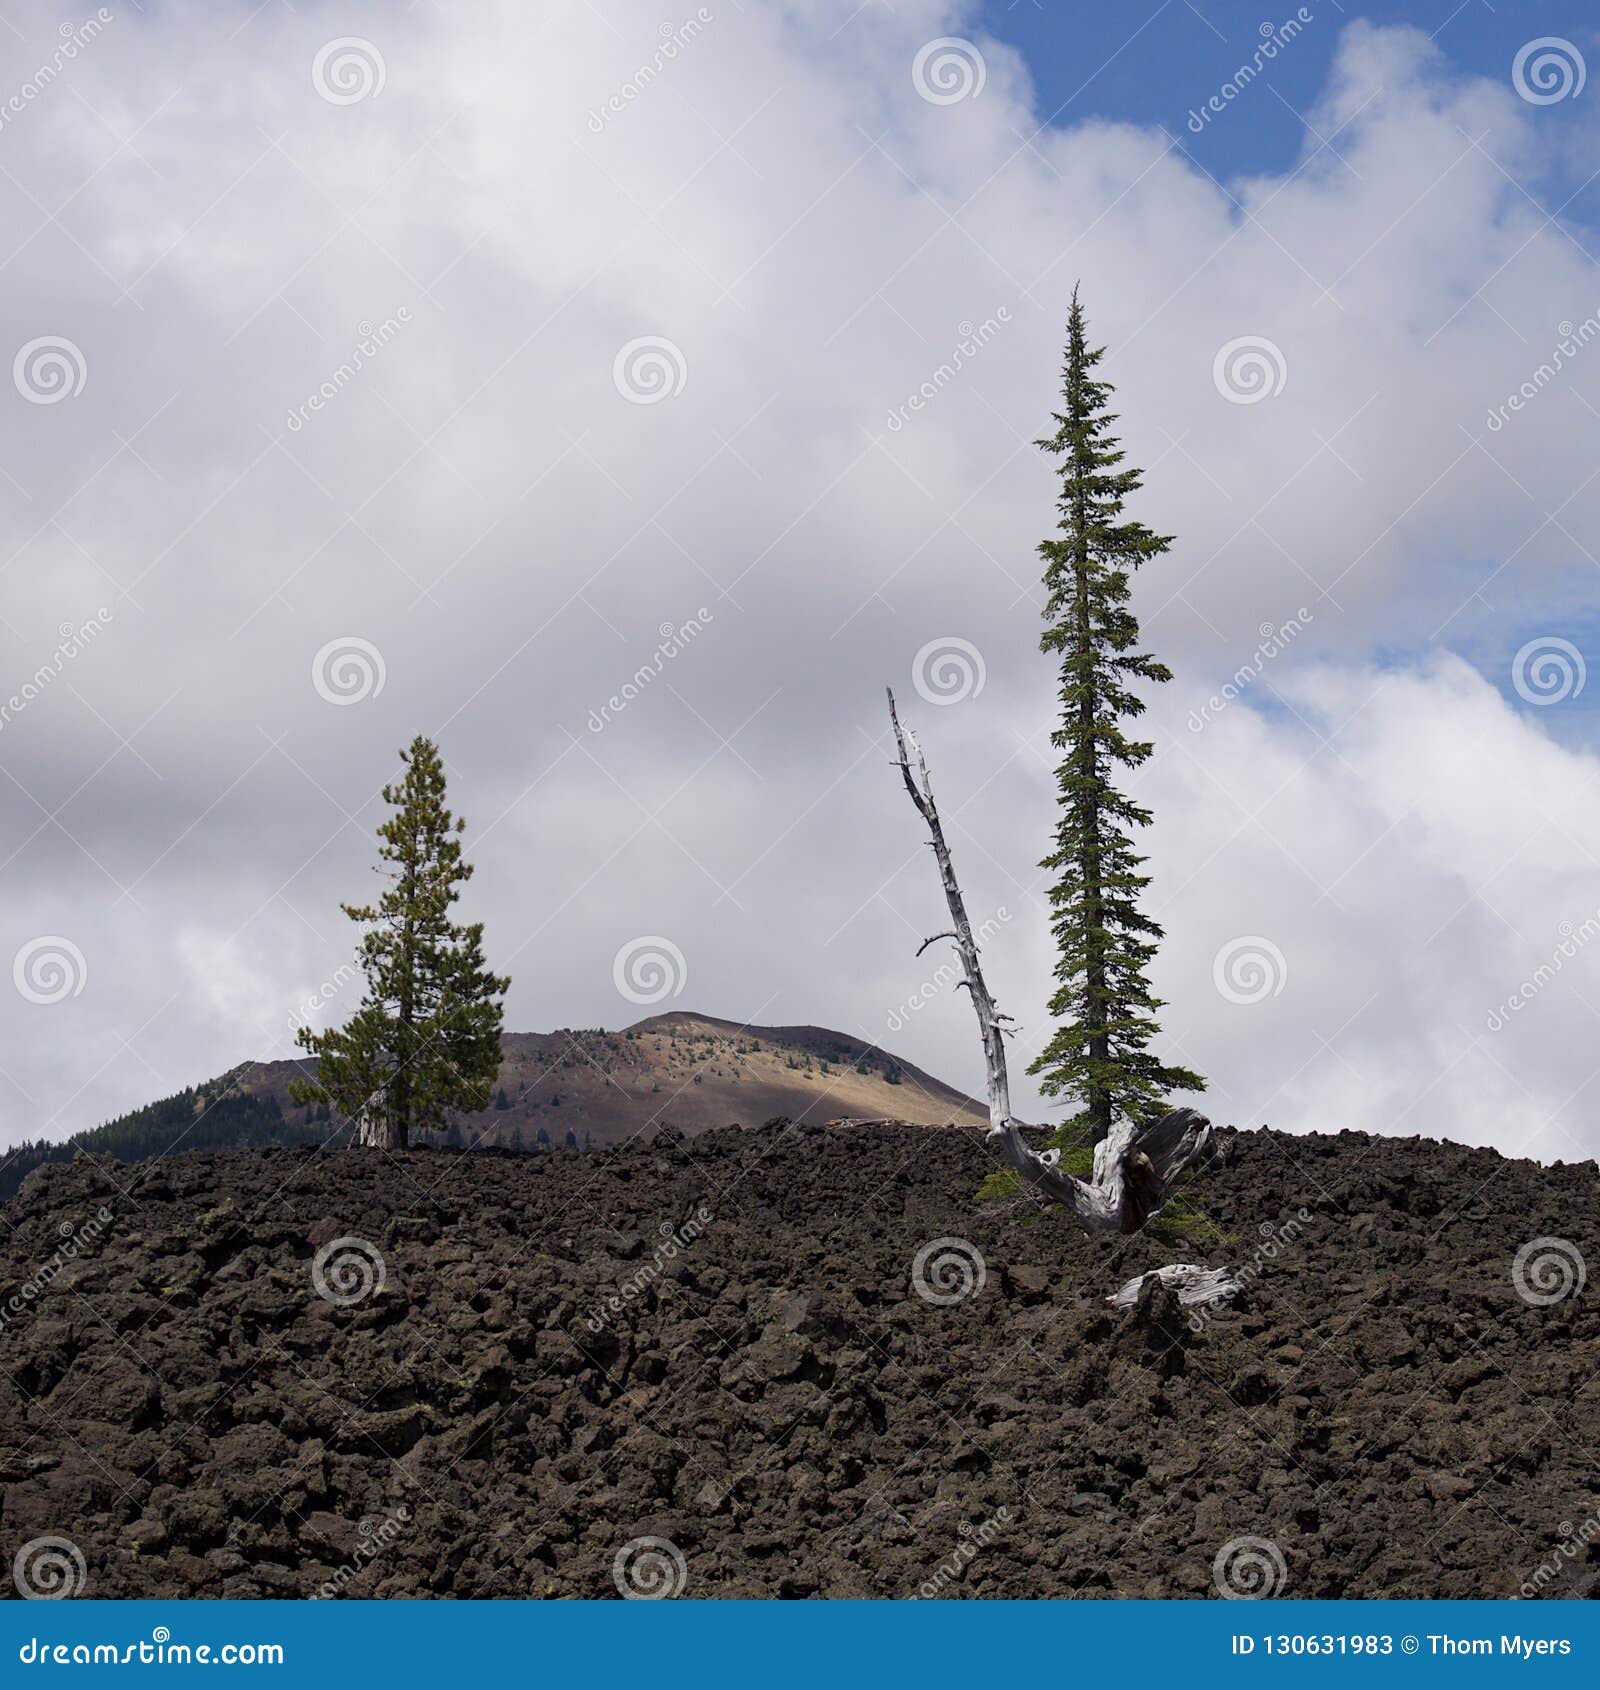 Standing Tall In The Rocks Stock Image Image Of Sunlight